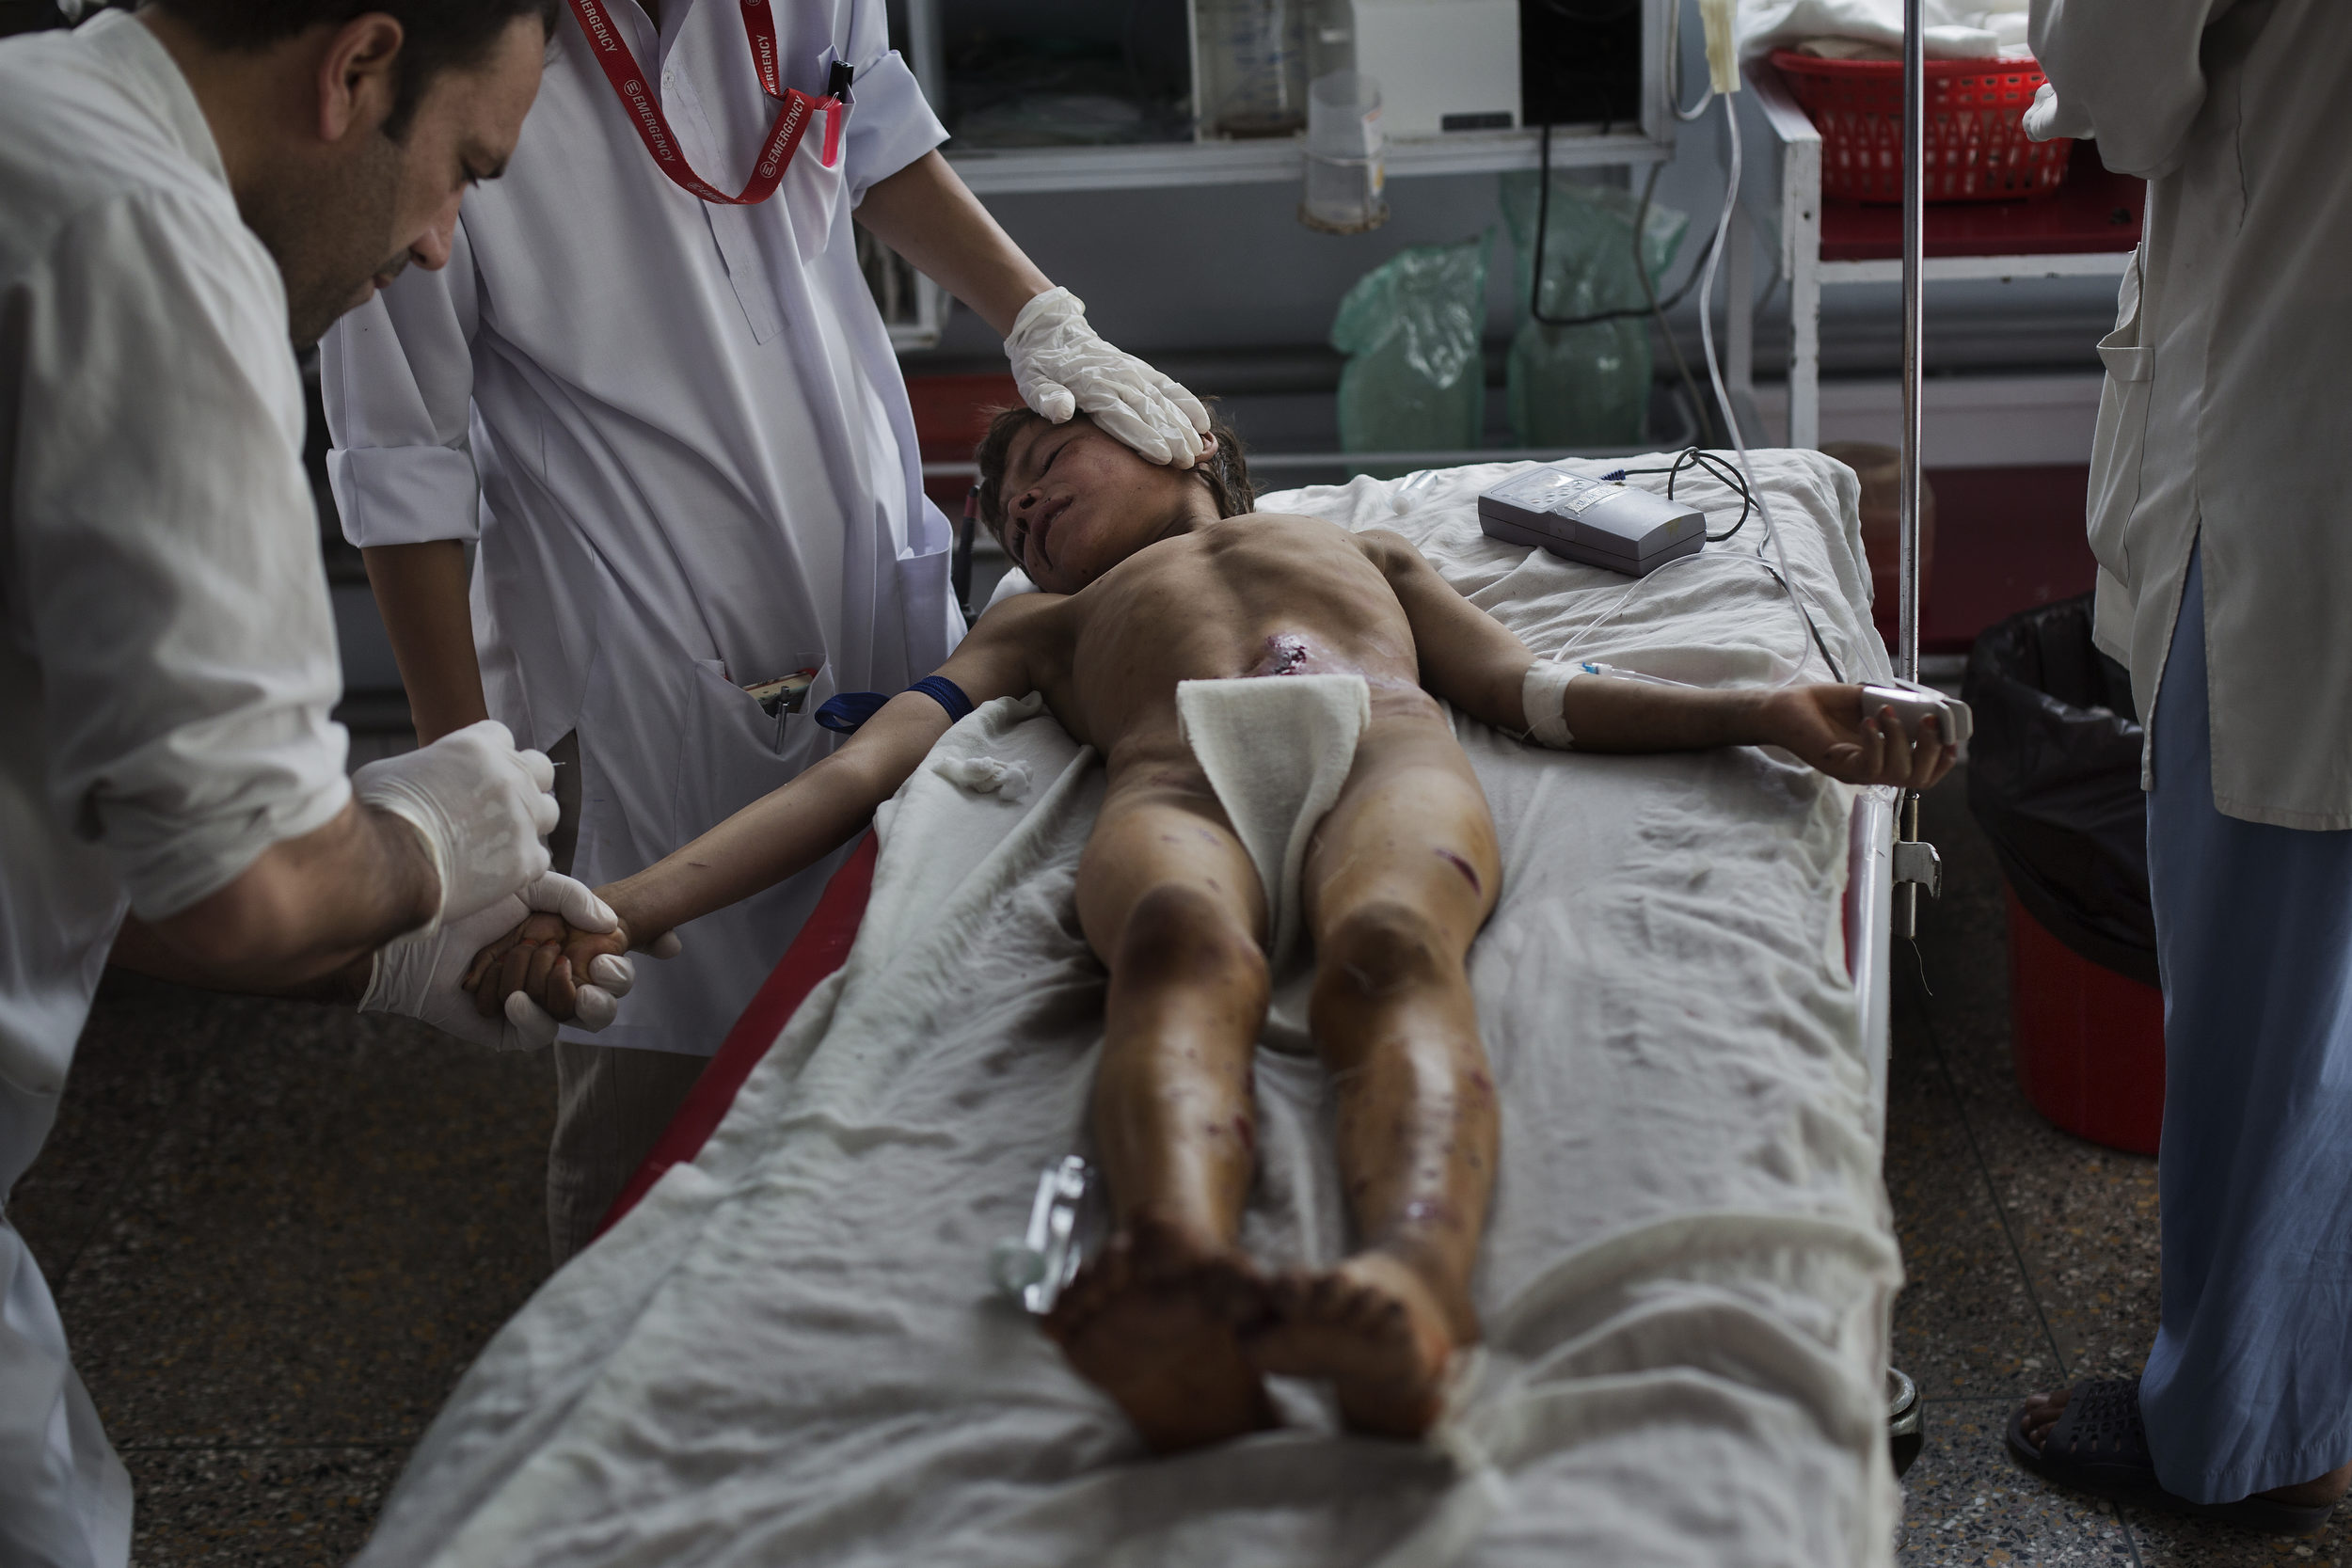  Salamy, 12, from Maidan Wardak, is treated by nurse Ahmad Shah for a shrapnel wound in his stomach 